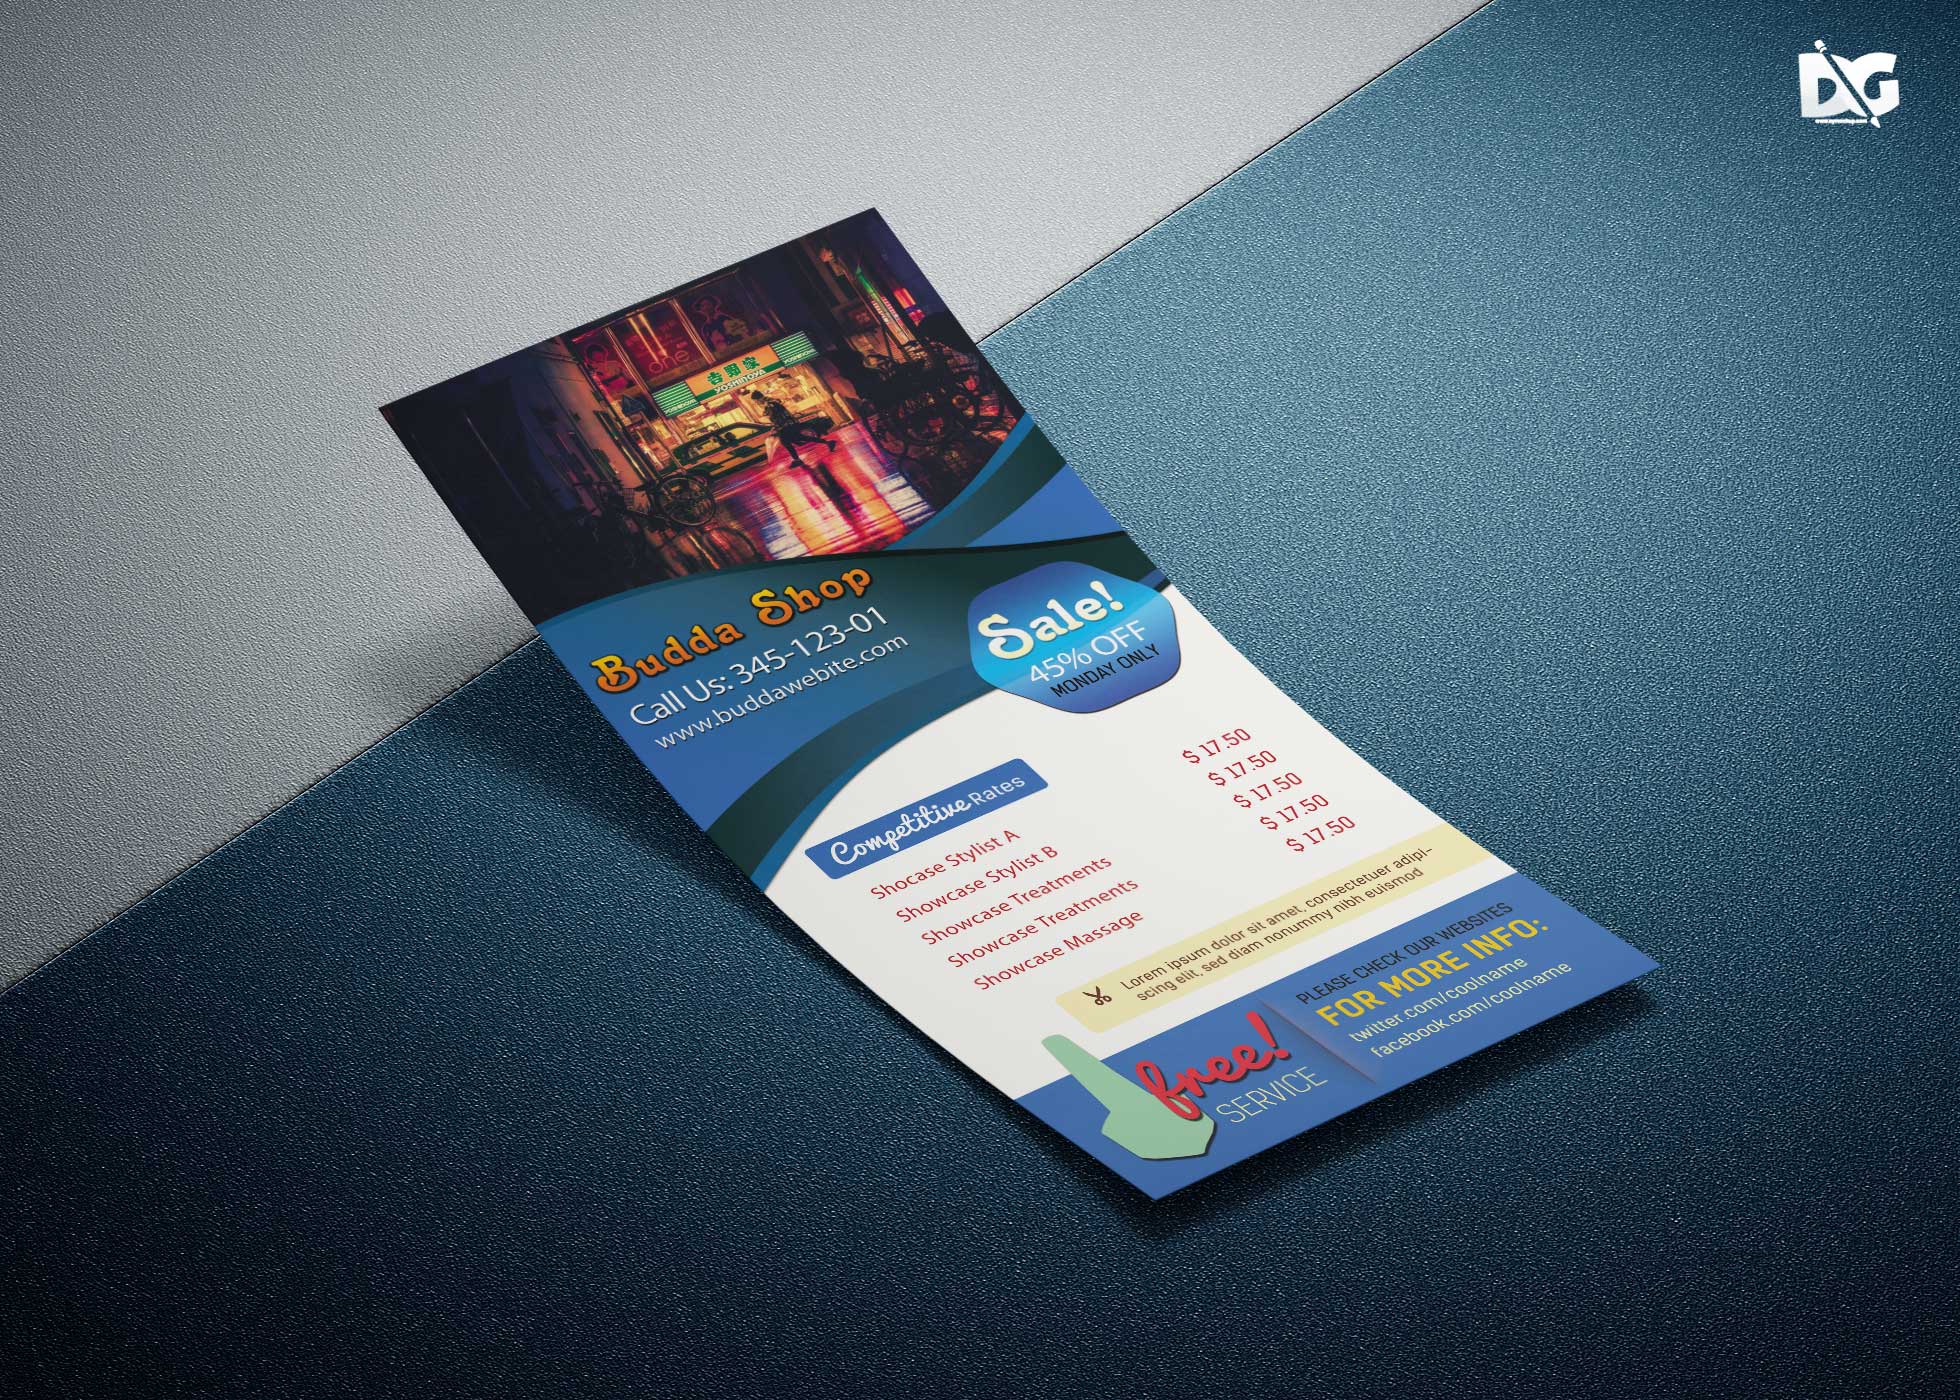 Download 10 Latest Free Rack Card Psd Resources Collection Psd Mockup Free Mockup